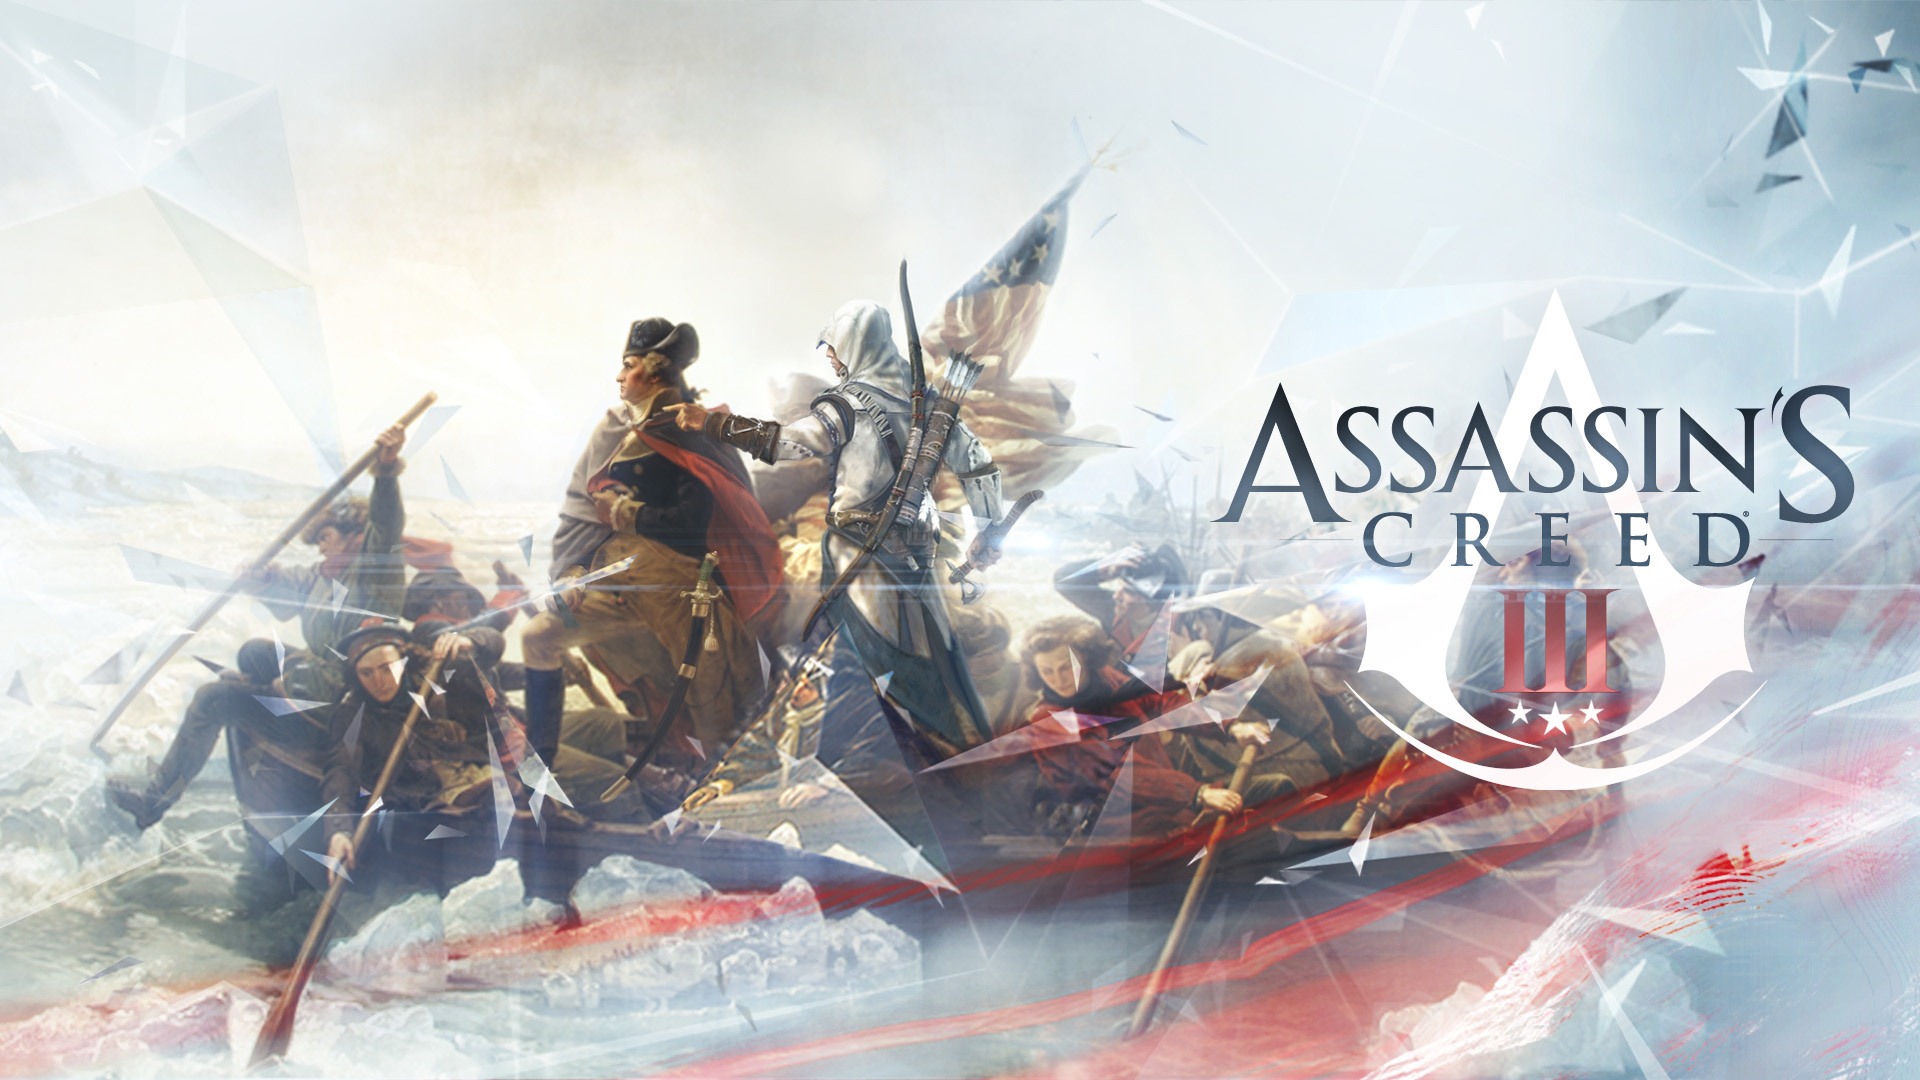 Assassin's Creed 3 HD wallpapers #4 - 1920x1080